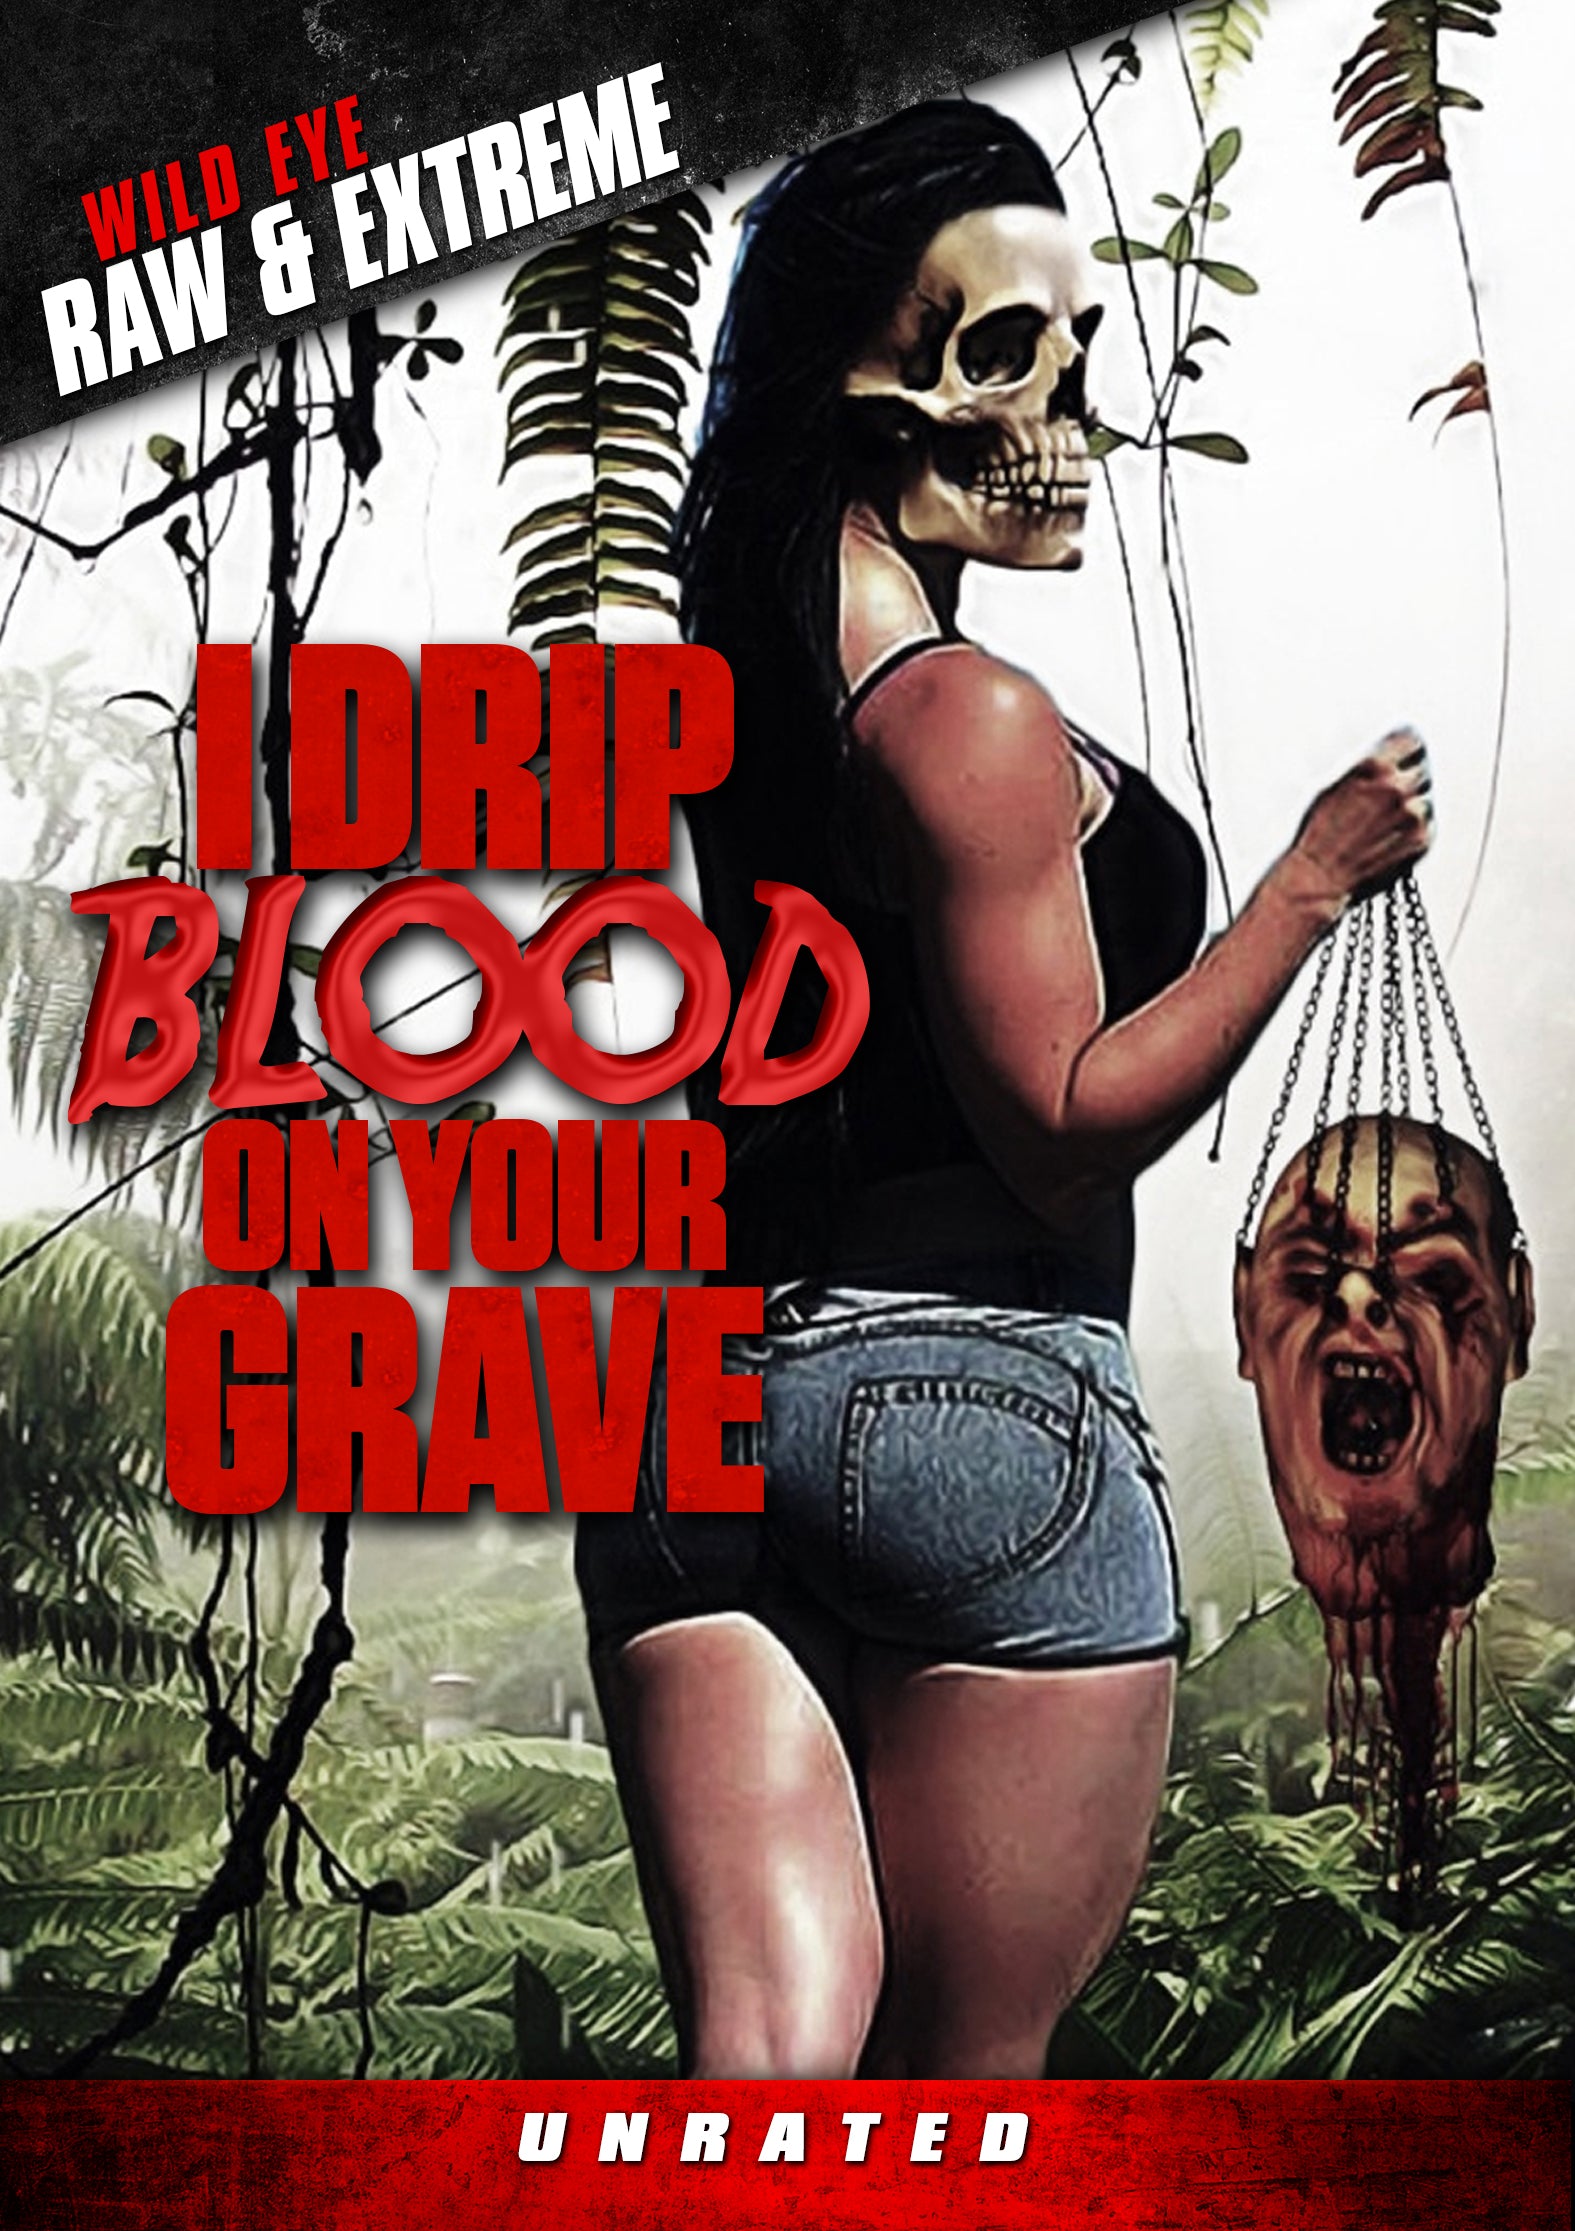 I DRIP BLOOD ON YOUR GRAVE DVD